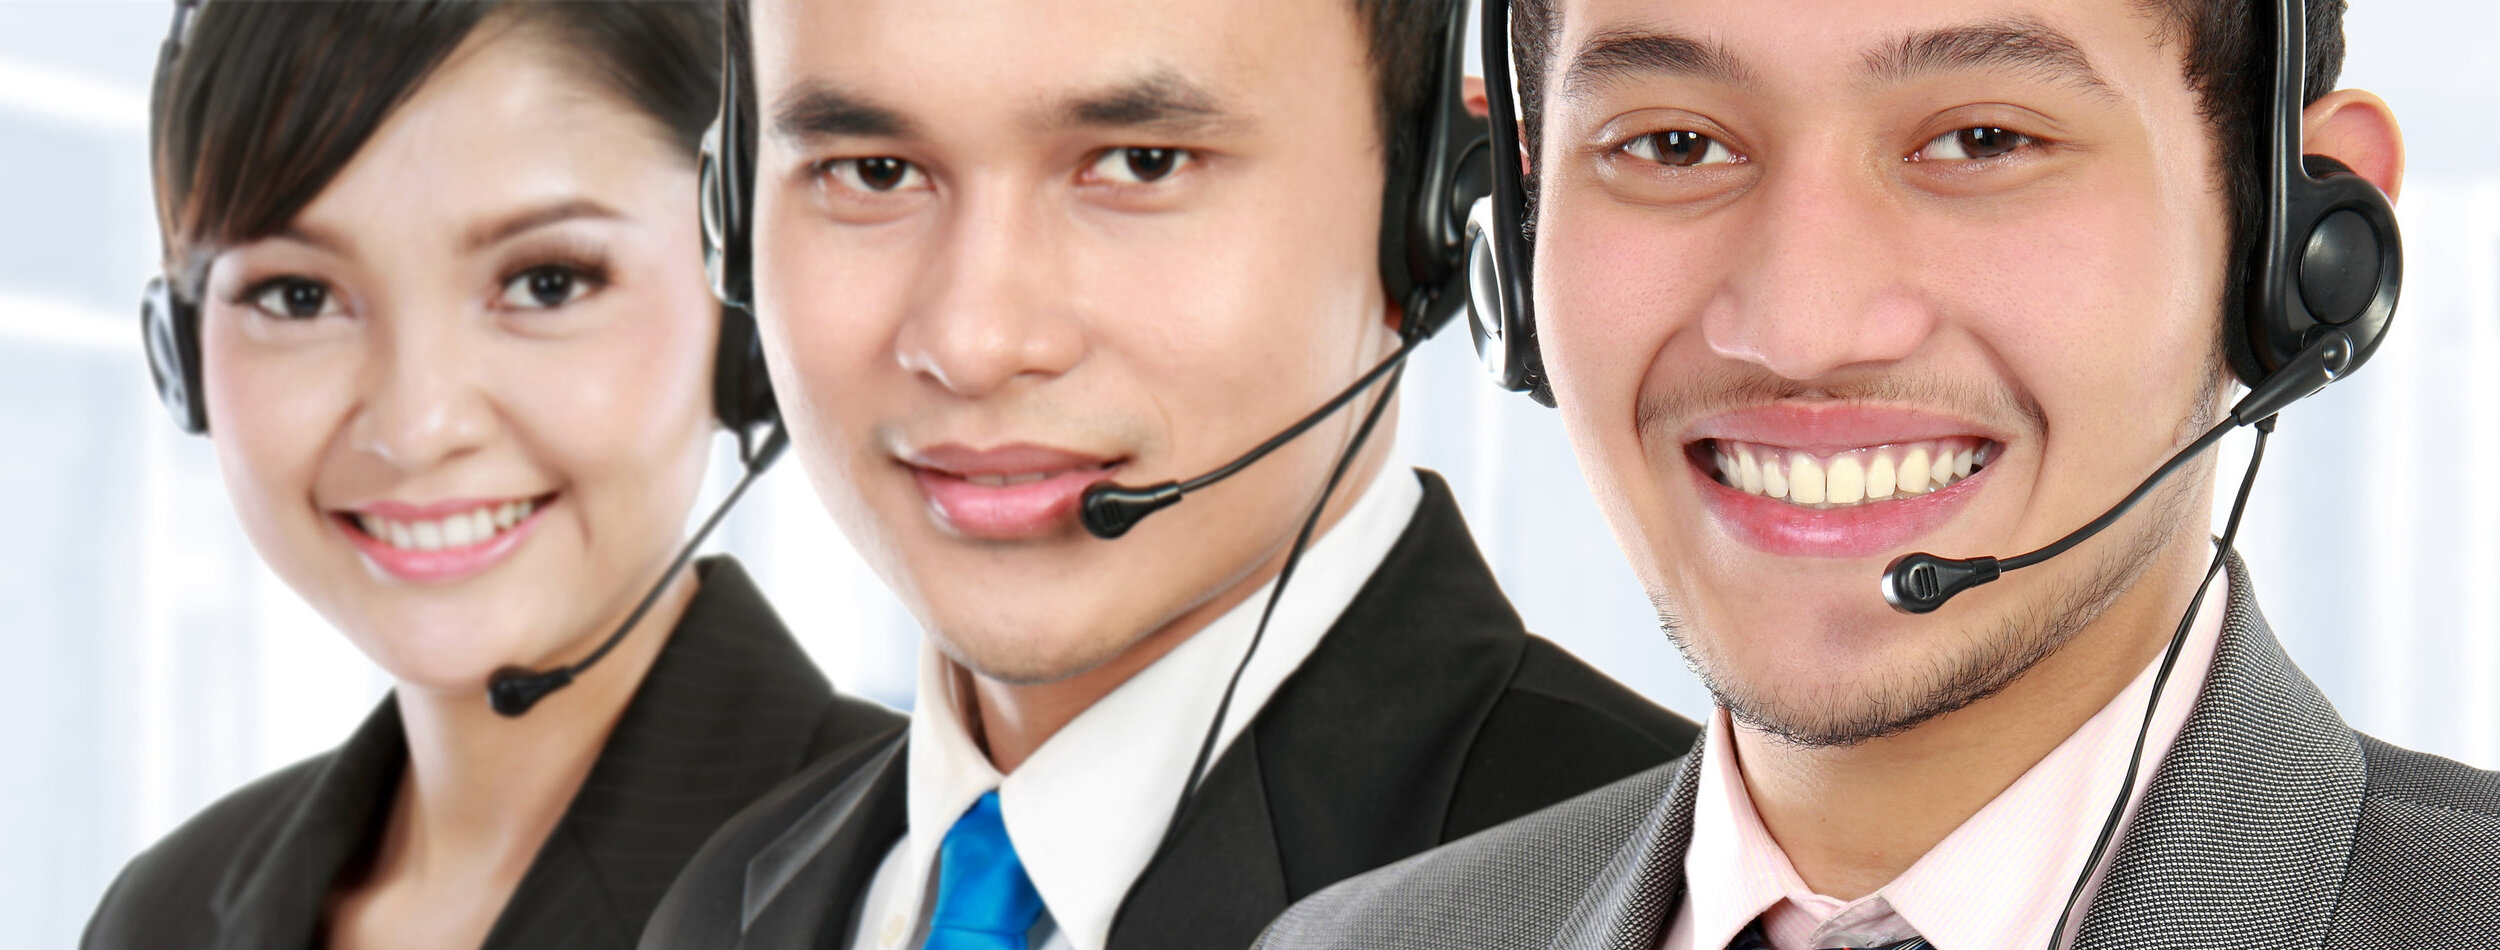 worker call center smiling with colleague in background